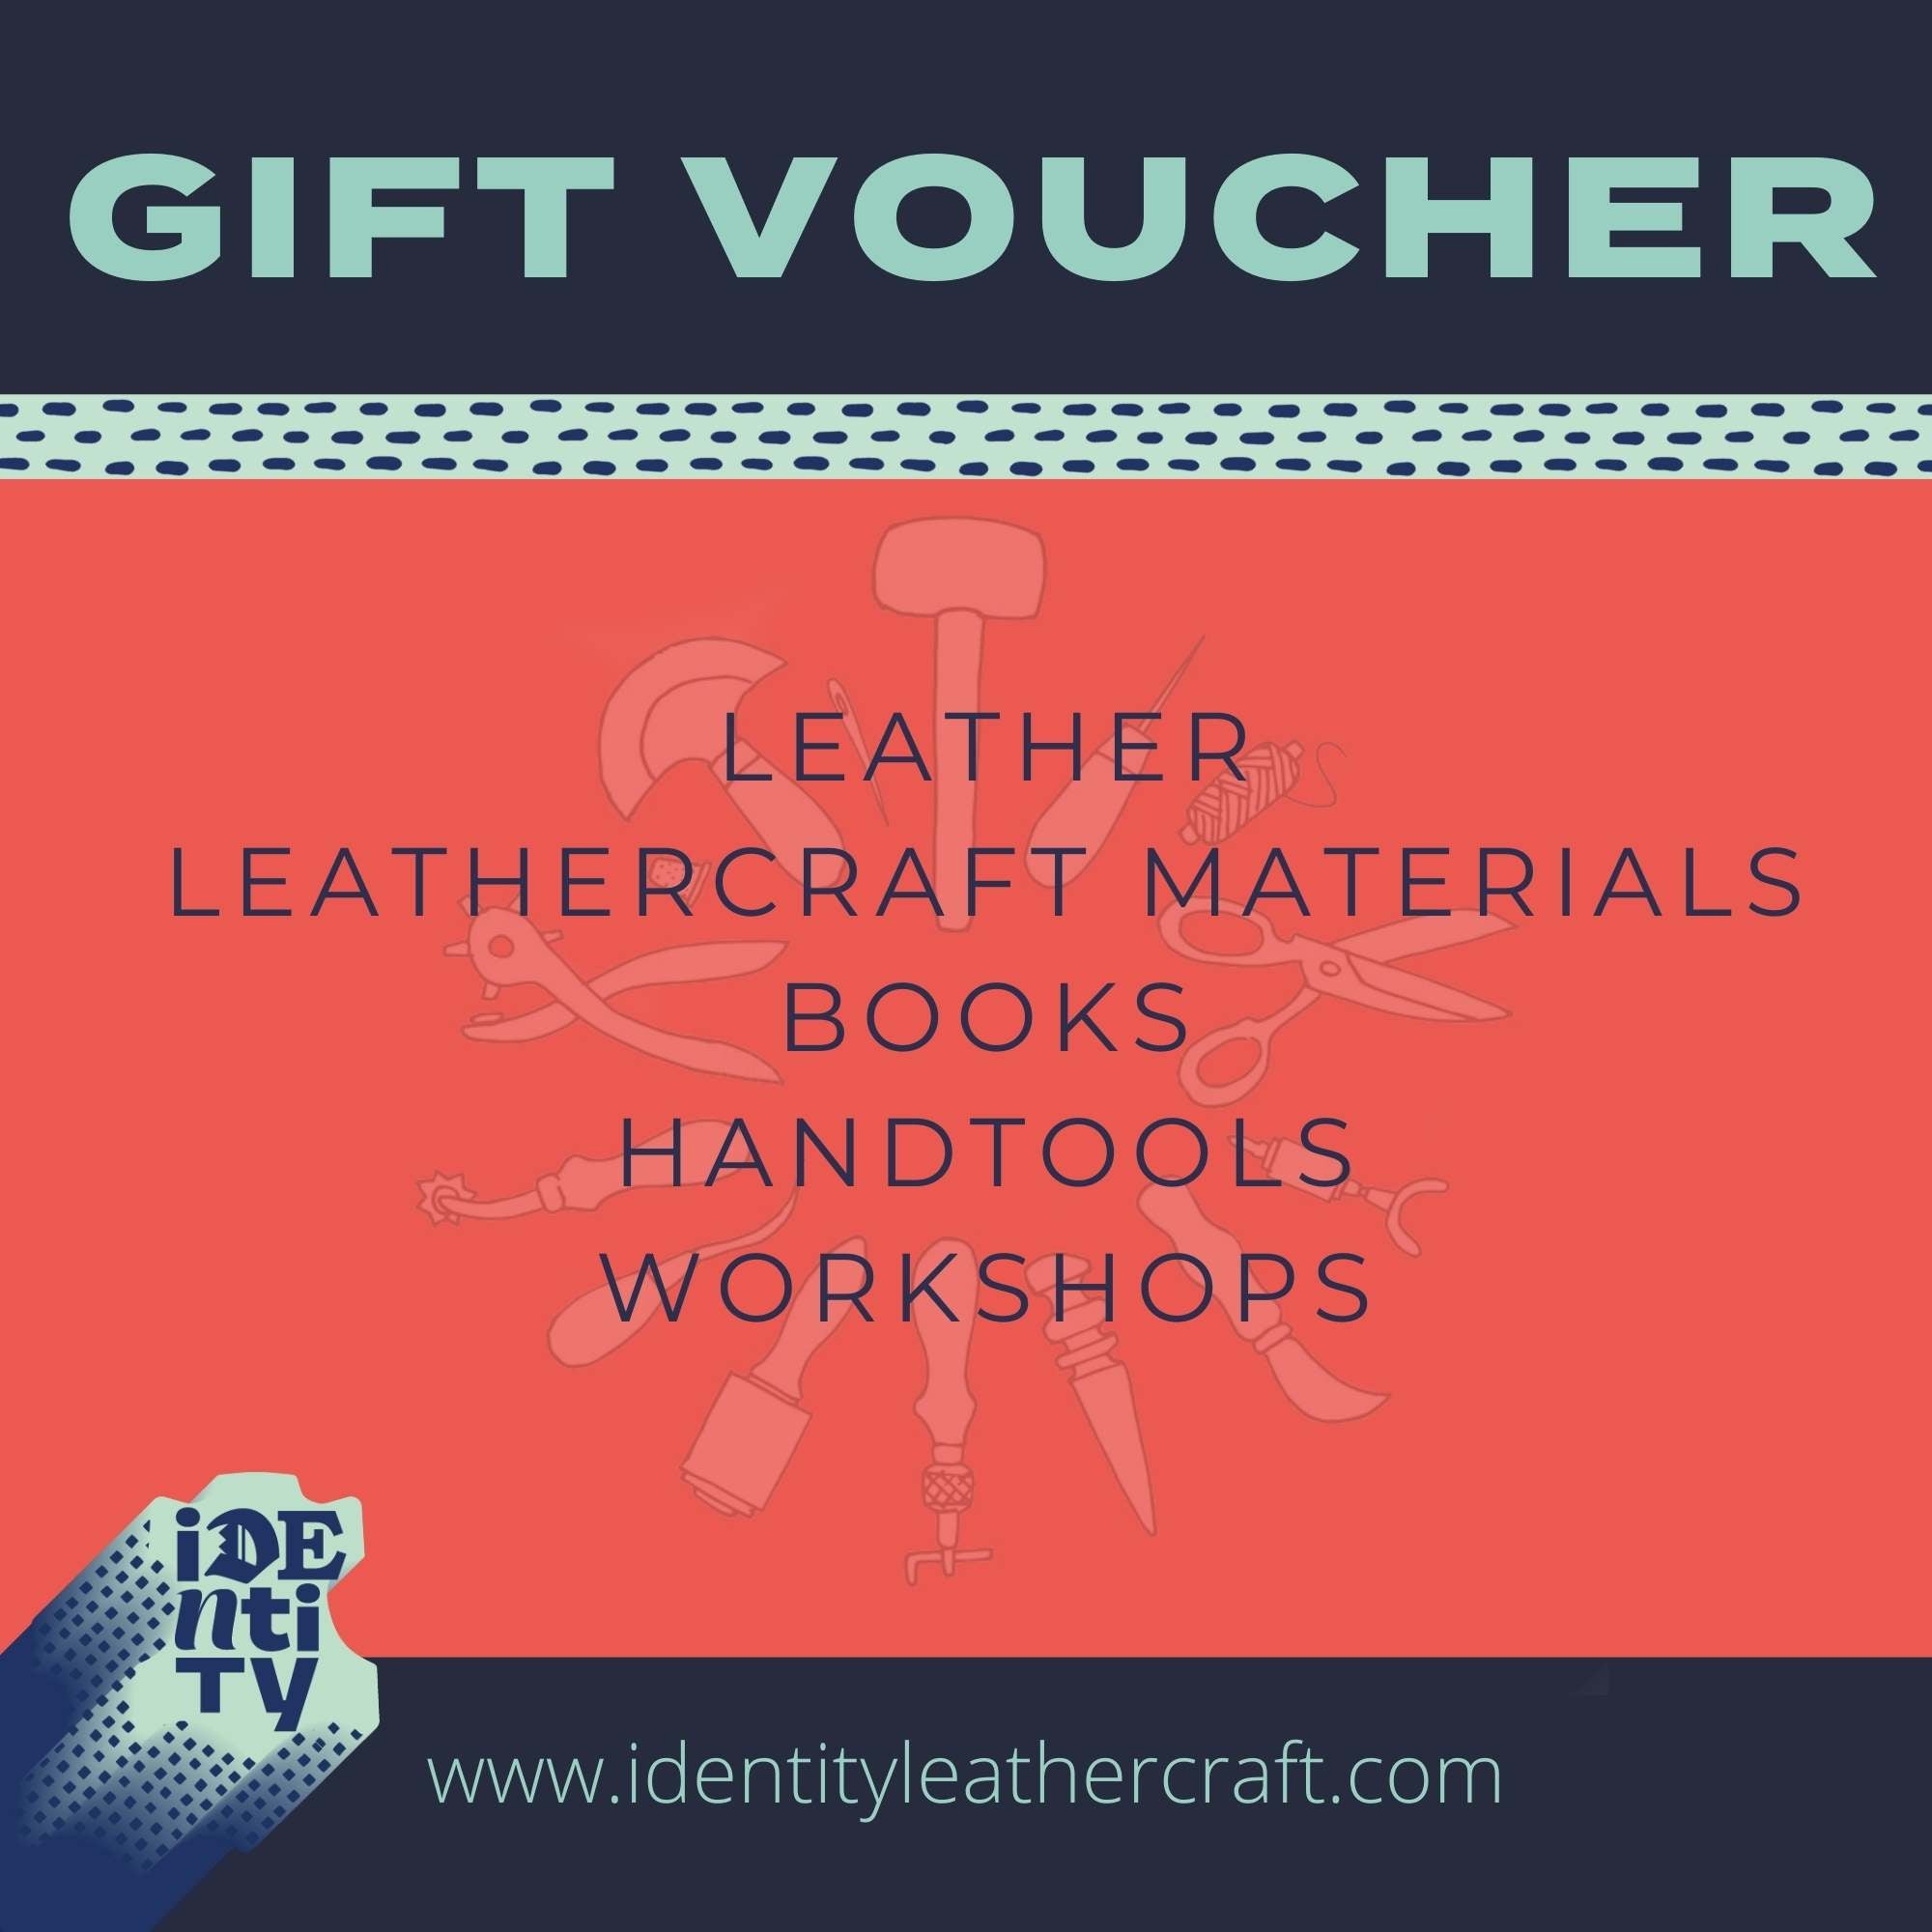 Gift vouchers available from Identity Leathercraft